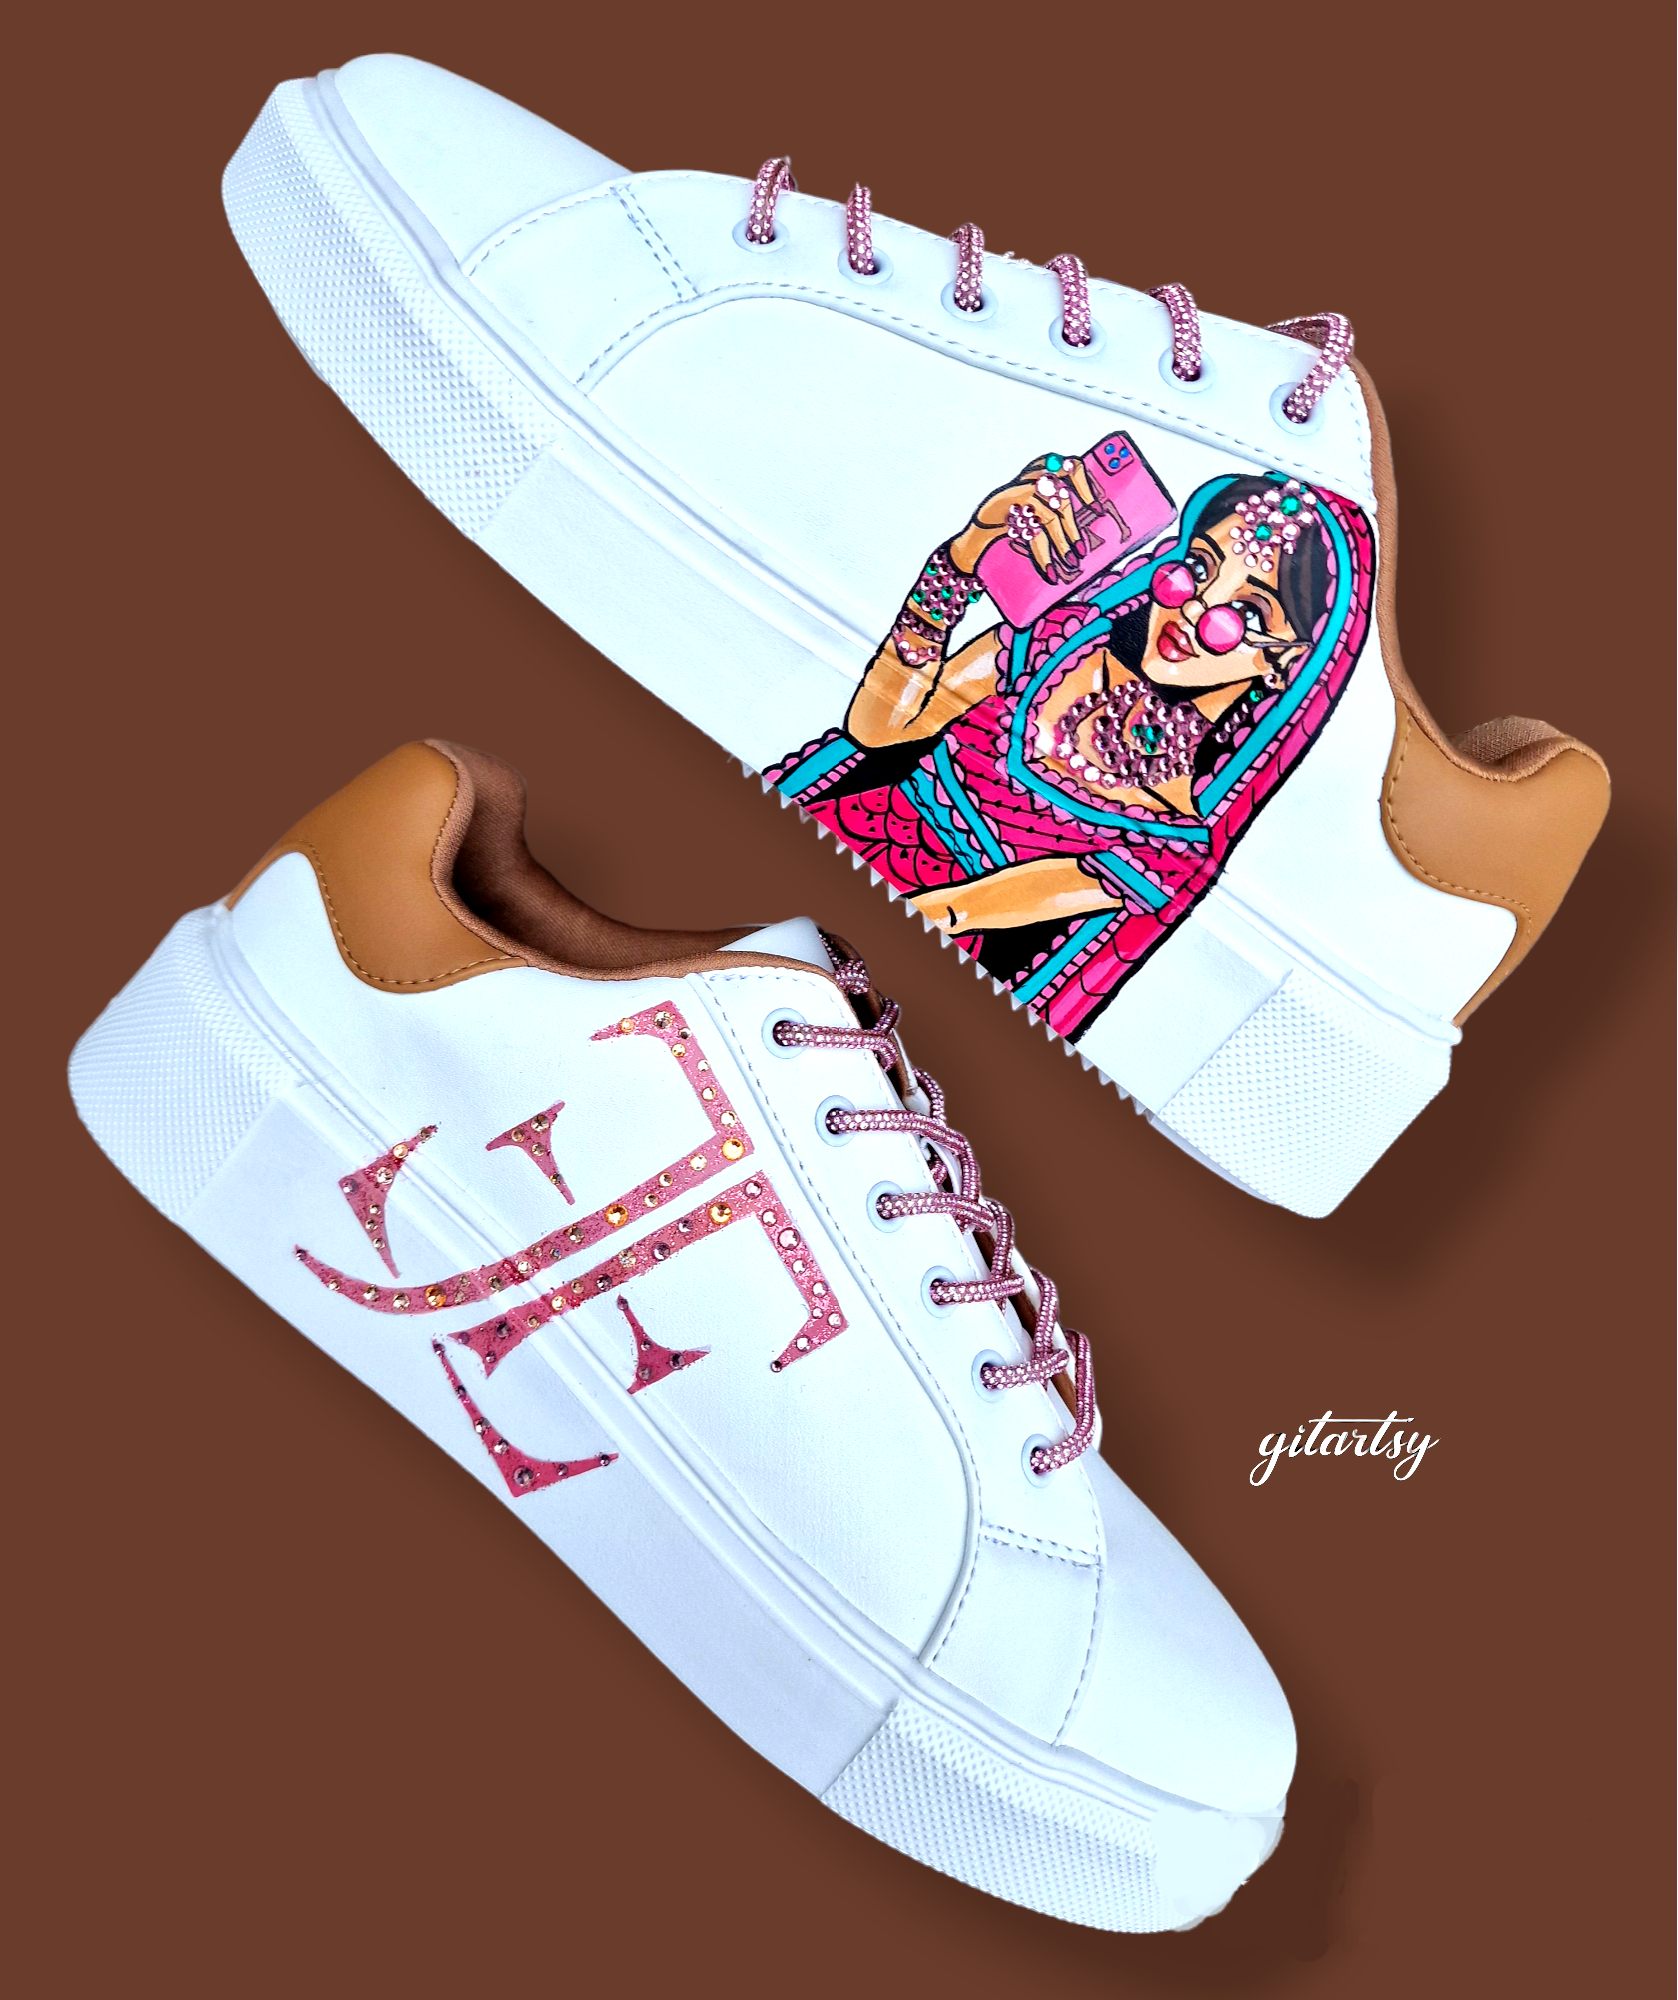 Custom sneakers hand painted for Accessories brand: "Jeet's accessories" 